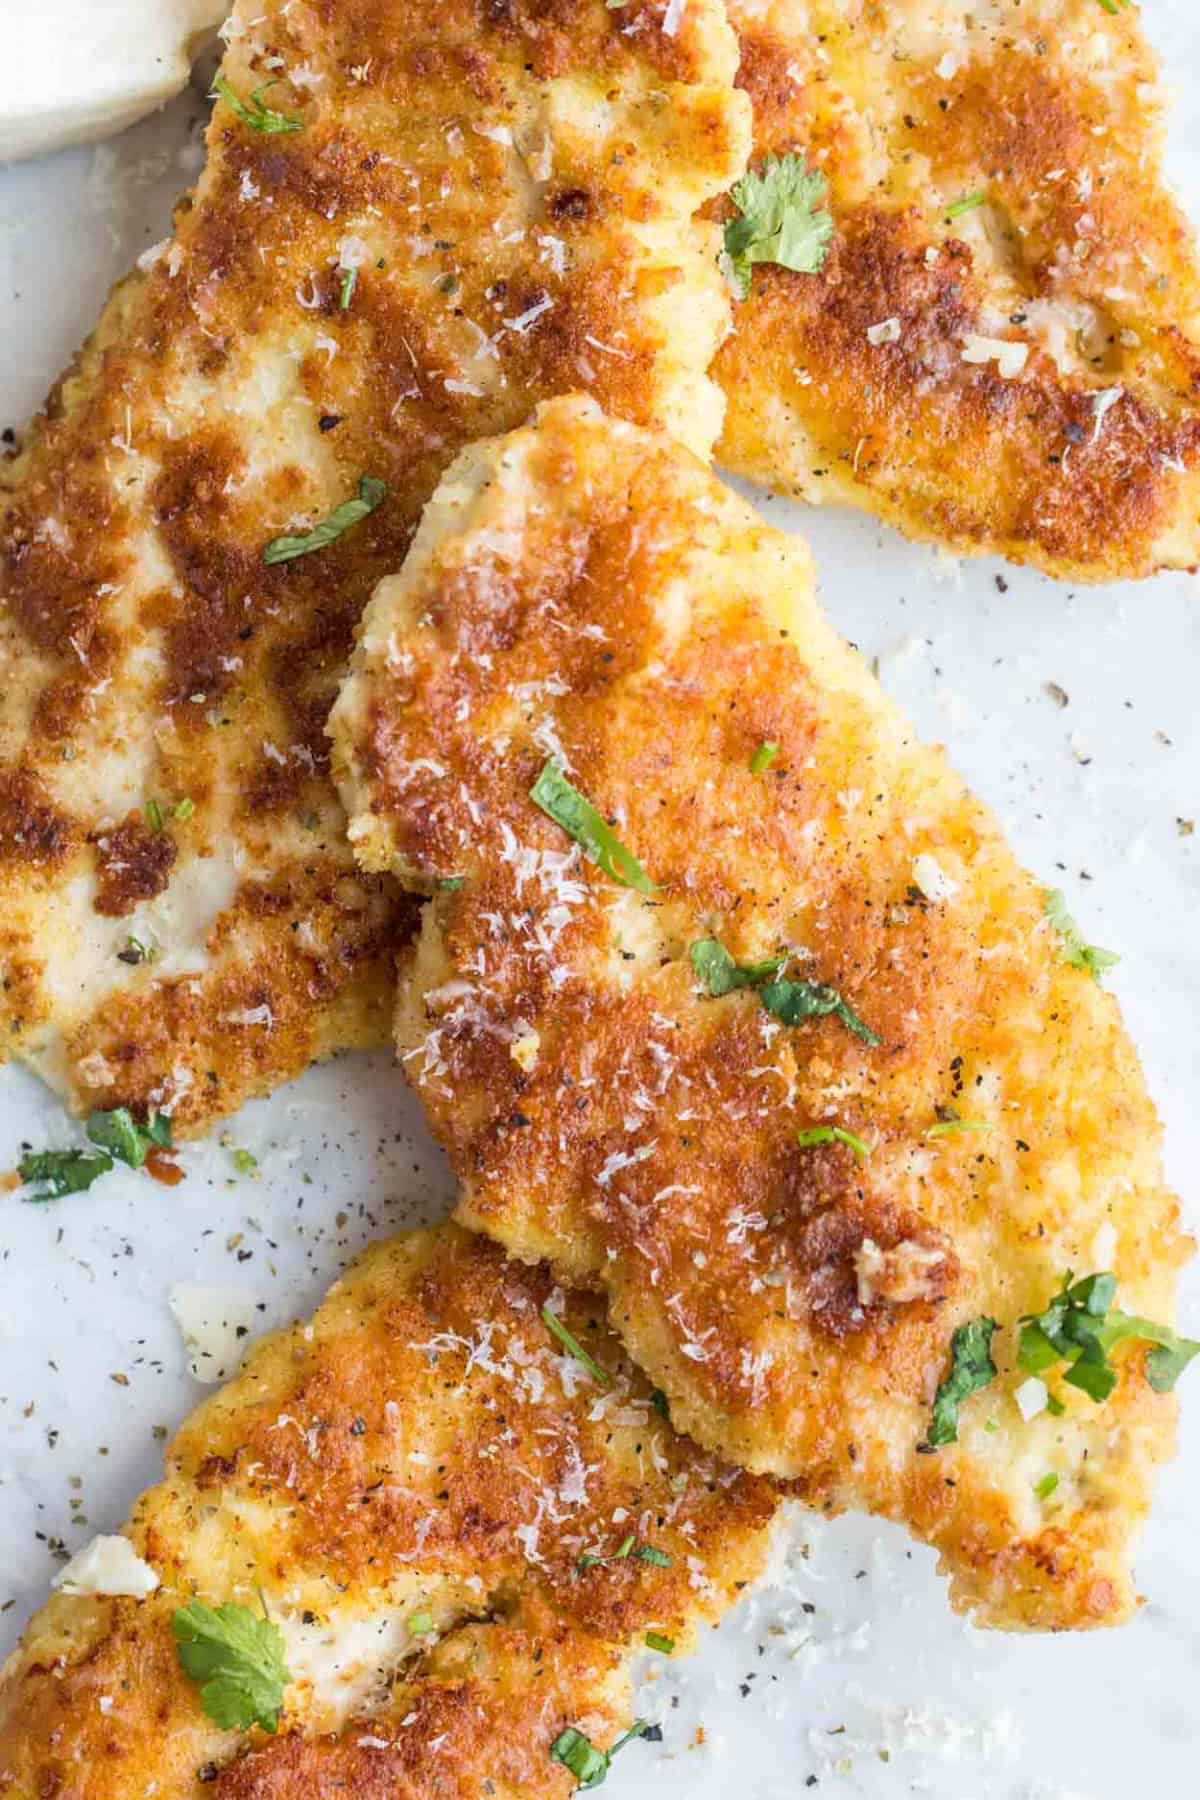 Close up image of crusted chicken topped with parmesan cheese.